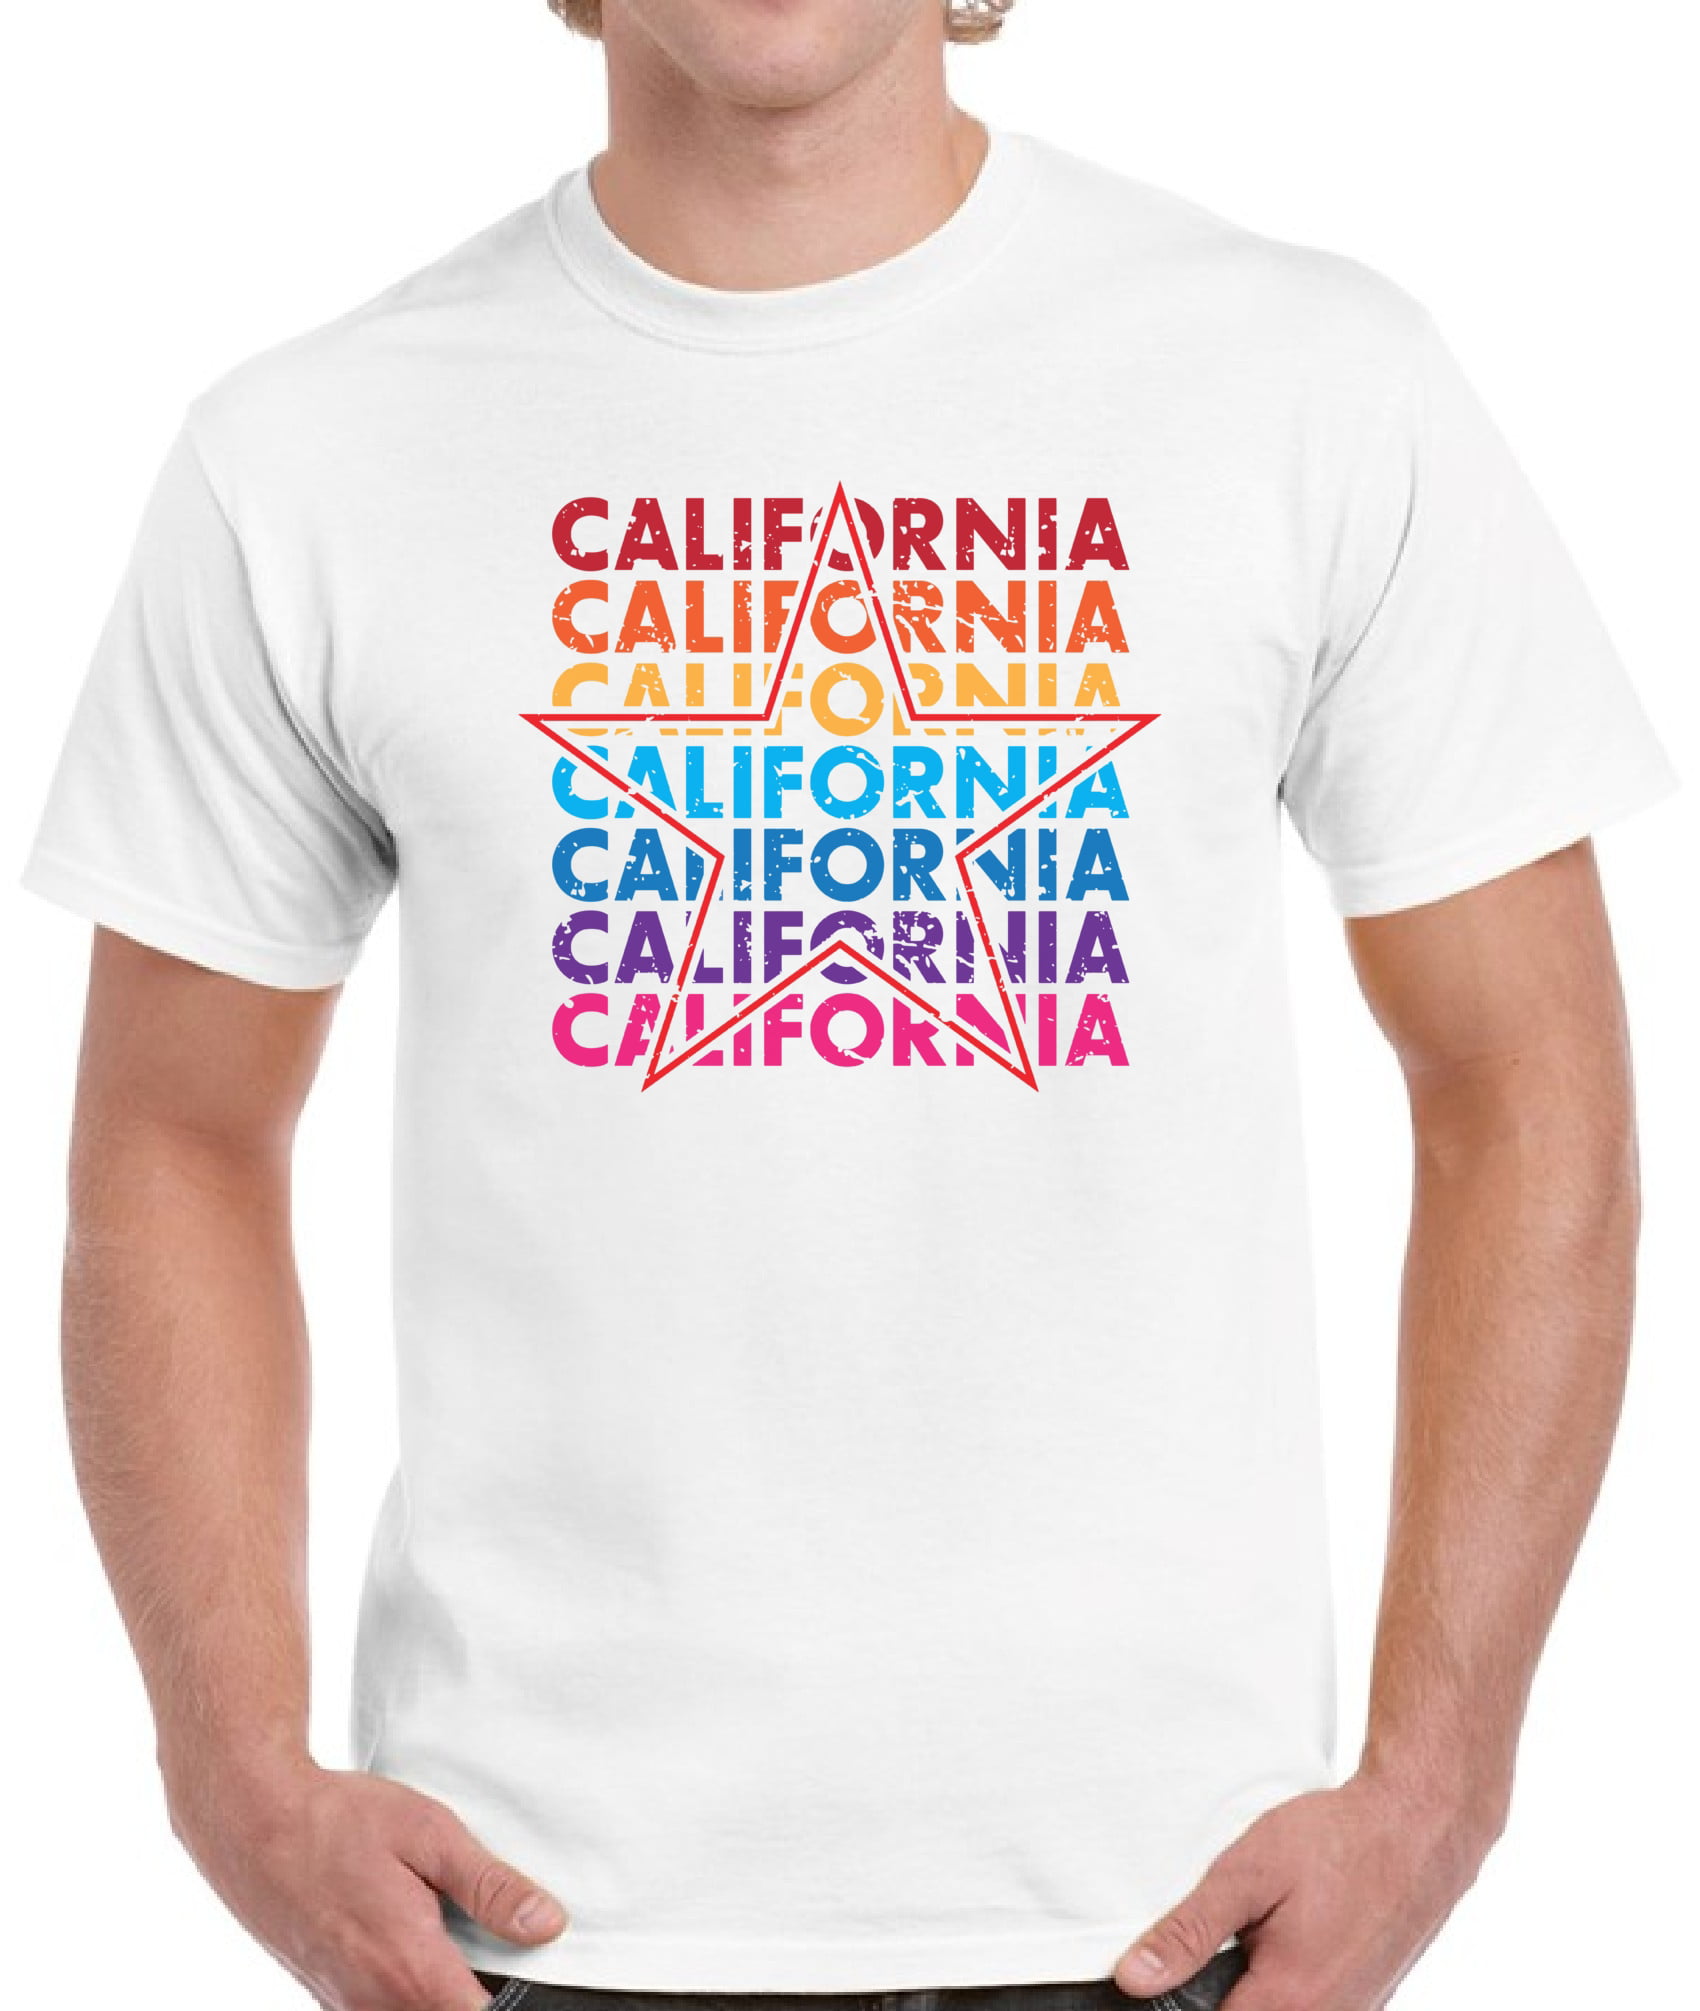 Colorfull California Star T-Shirt for Men S M L XL 2XL 4XL USA State Graphic - California Clothes Collection Funny Cali Gift for Men - Walmart.com